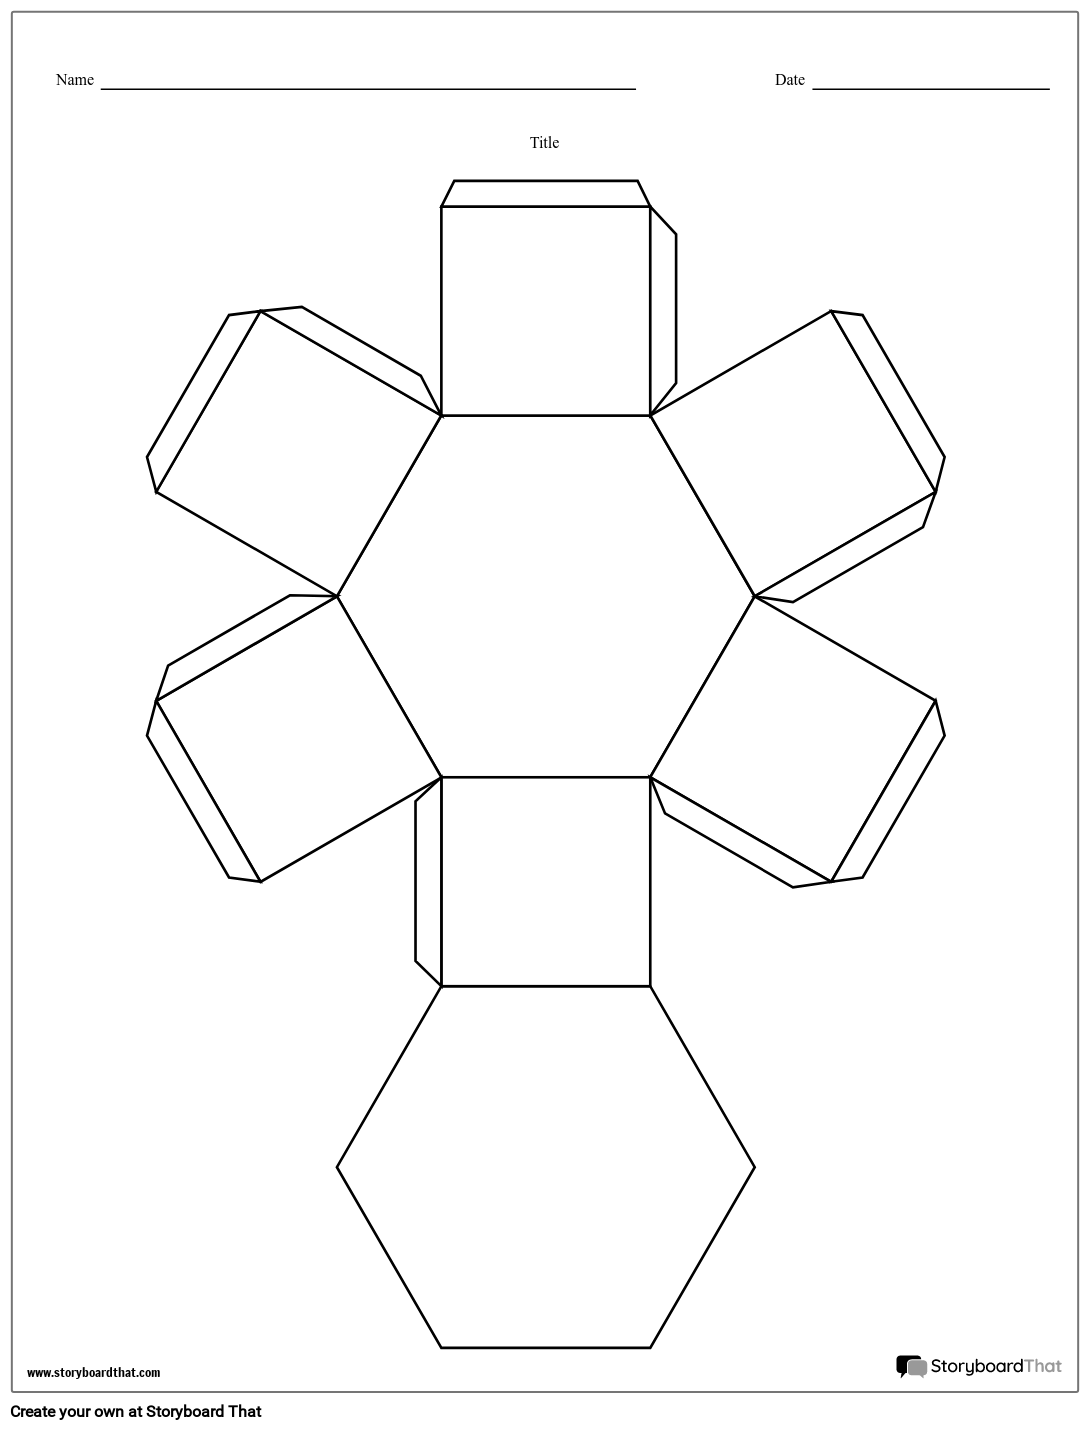 hexagon-story-cube-template-storyboard-by-worksheet-templates